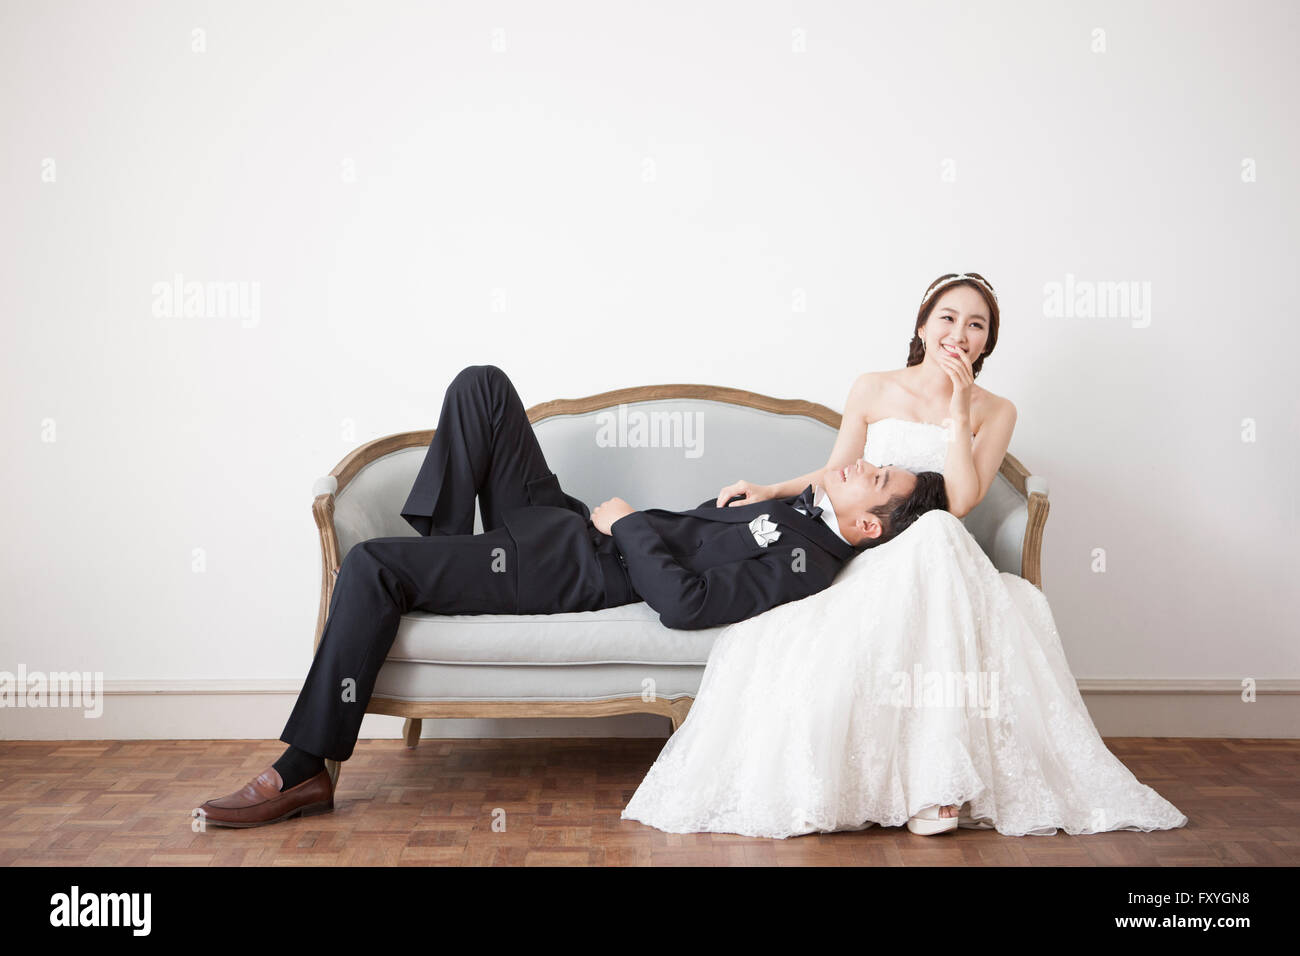 Groom lying on a couch with his head on bride's lap and bride smiling with her hand on her mouth Stock Photo